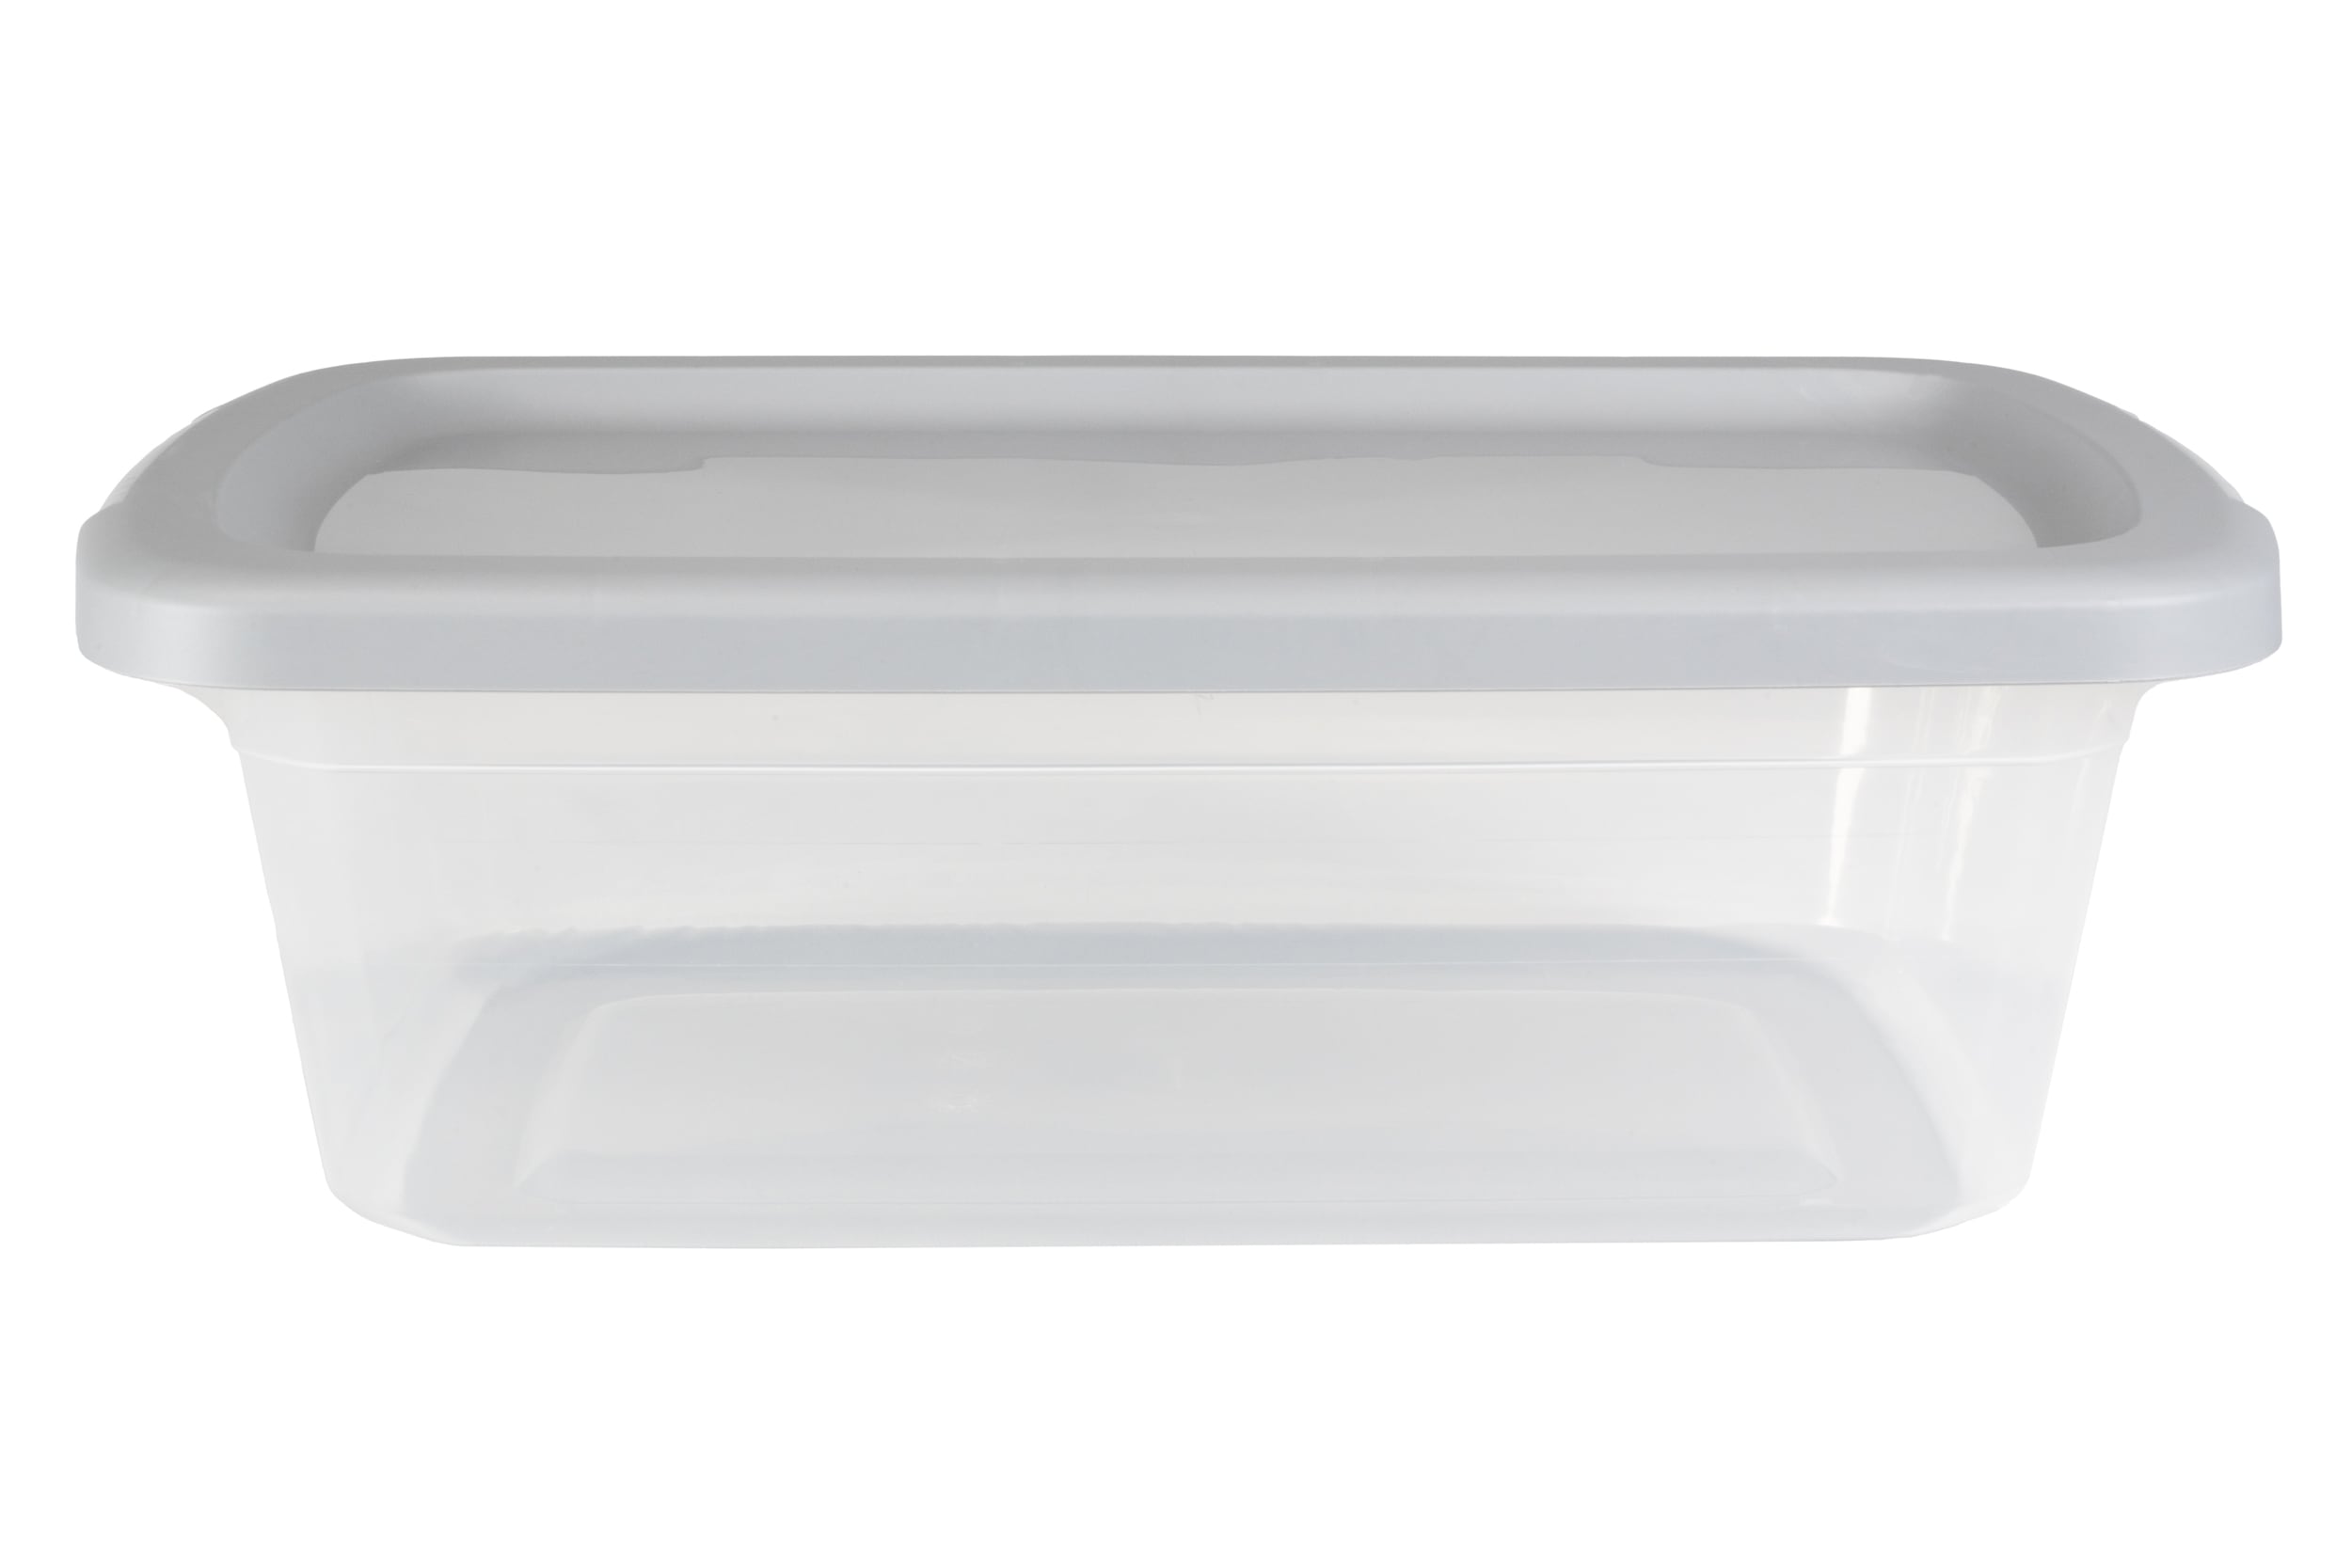 Project Source 27-Gallon (108-Quart) Clear Tote with Standard Snap Lid